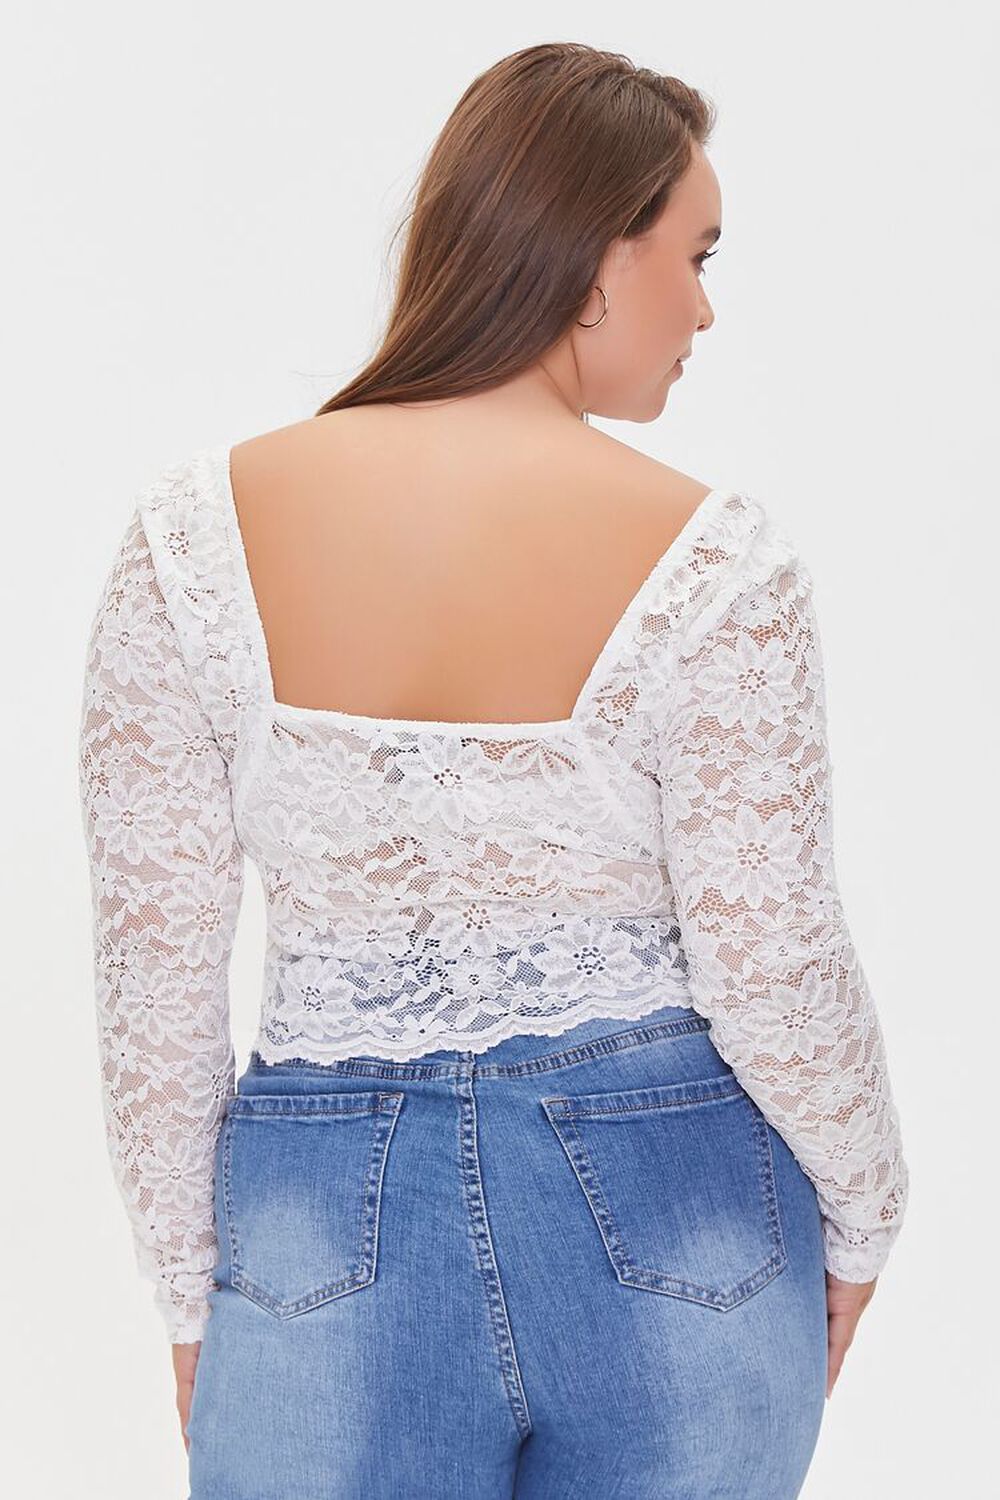 IVORY Plus Size Sheer Lace Crop Top, image 3